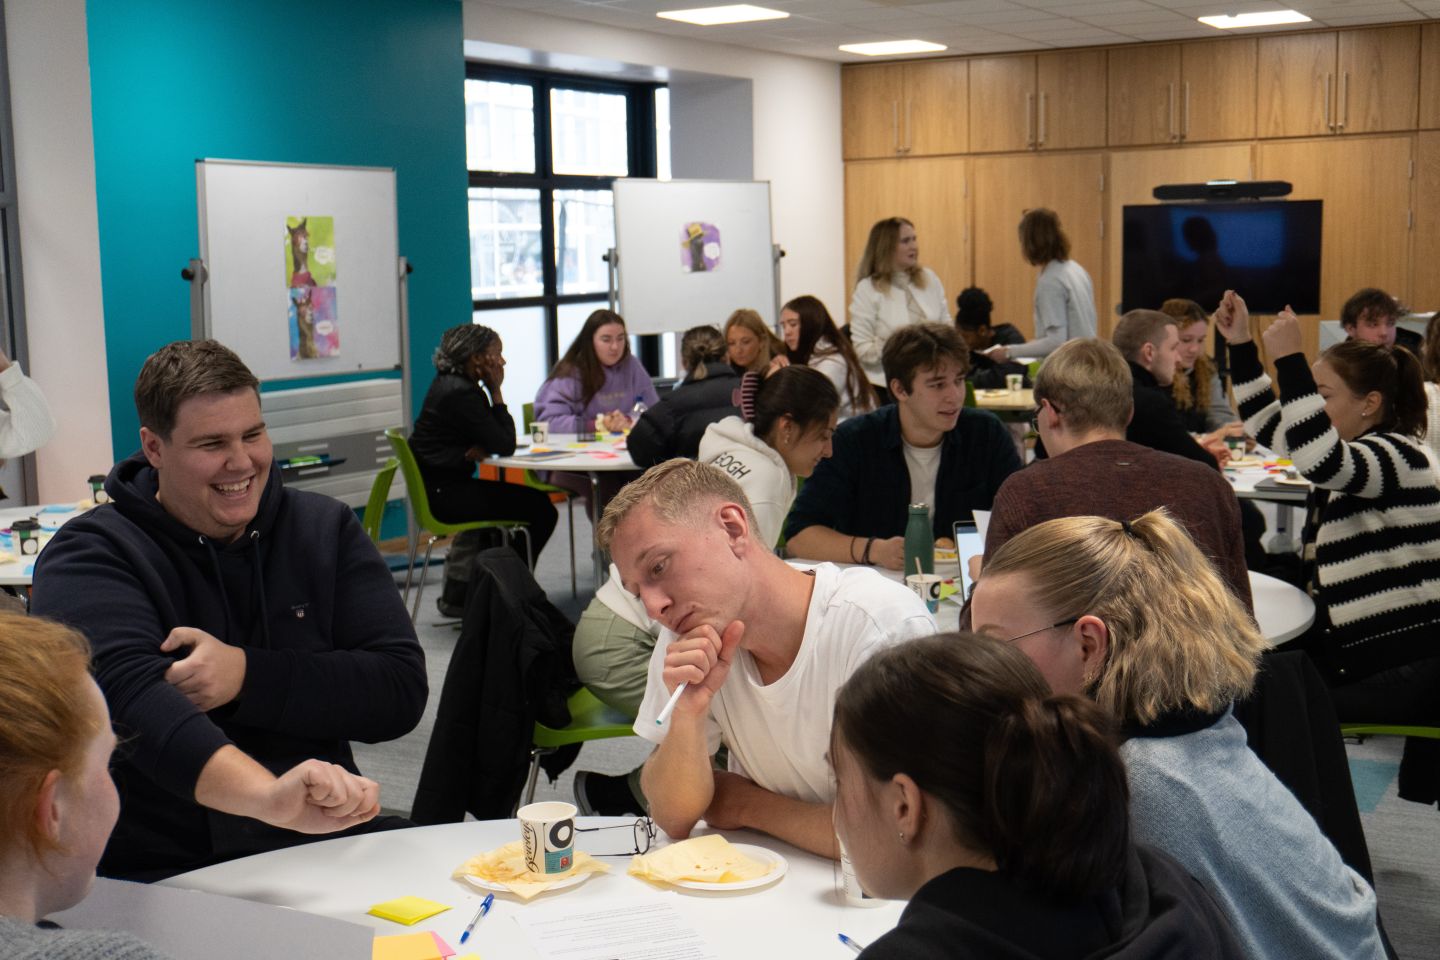 Compelling speakers and engaging workshops ensure success of inaugural Inspire Fest by GROWTHhub